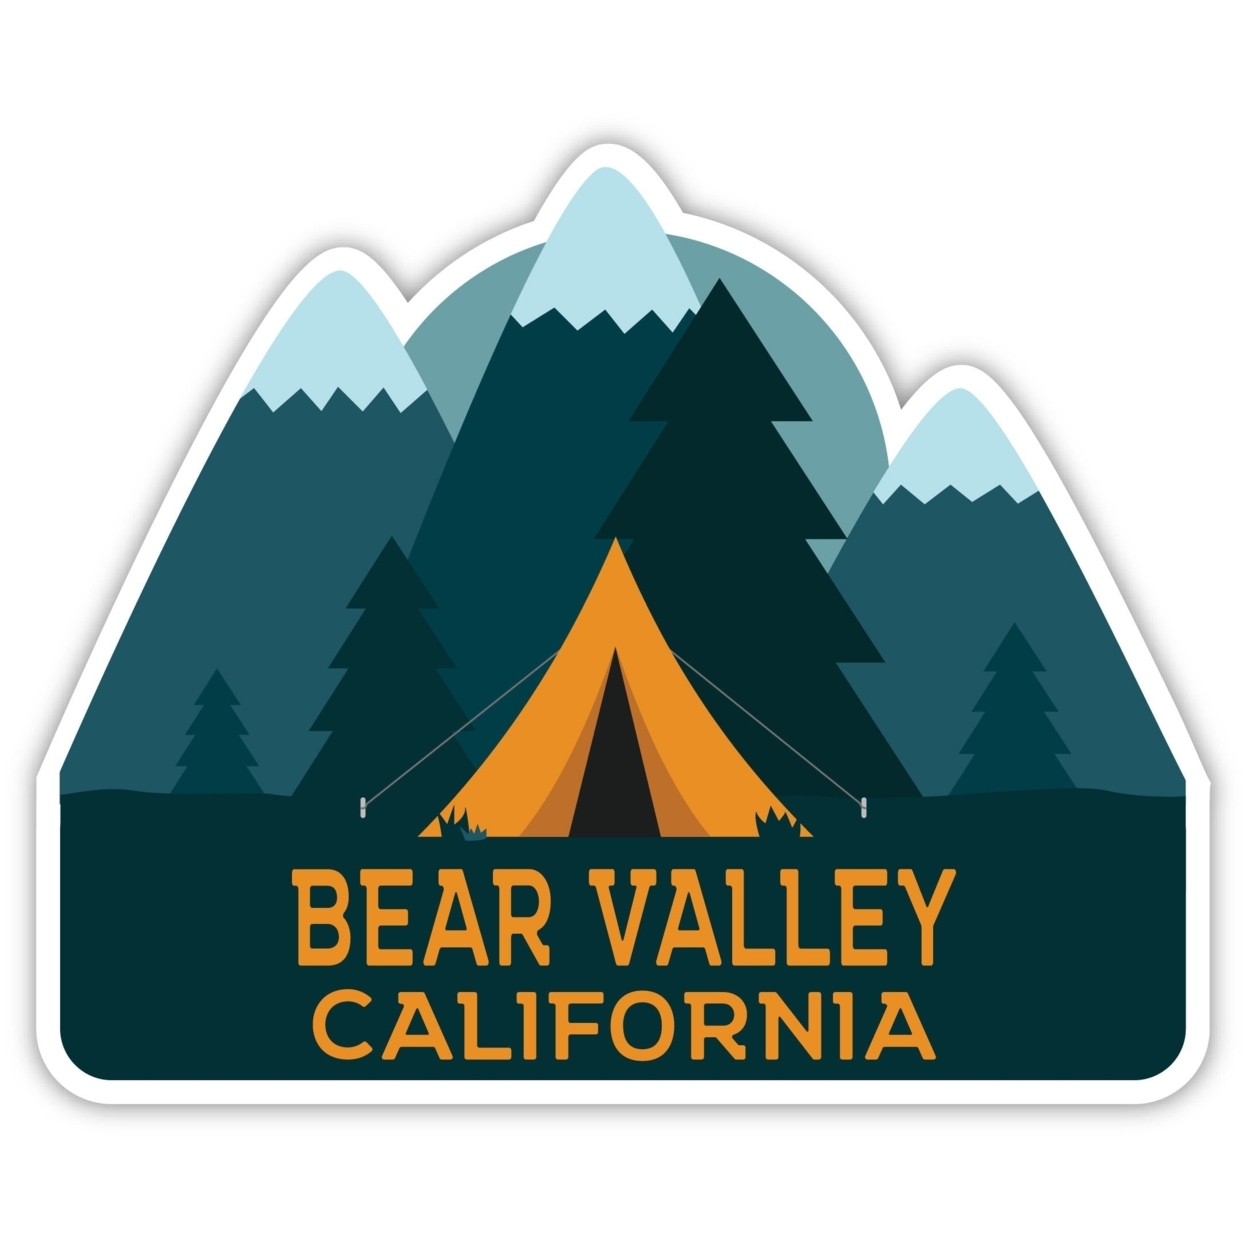 Bear Valley California Souvenir Decorative Stickers (Choose Theme And Size) - 4-Pack, 4-Inch, Tent